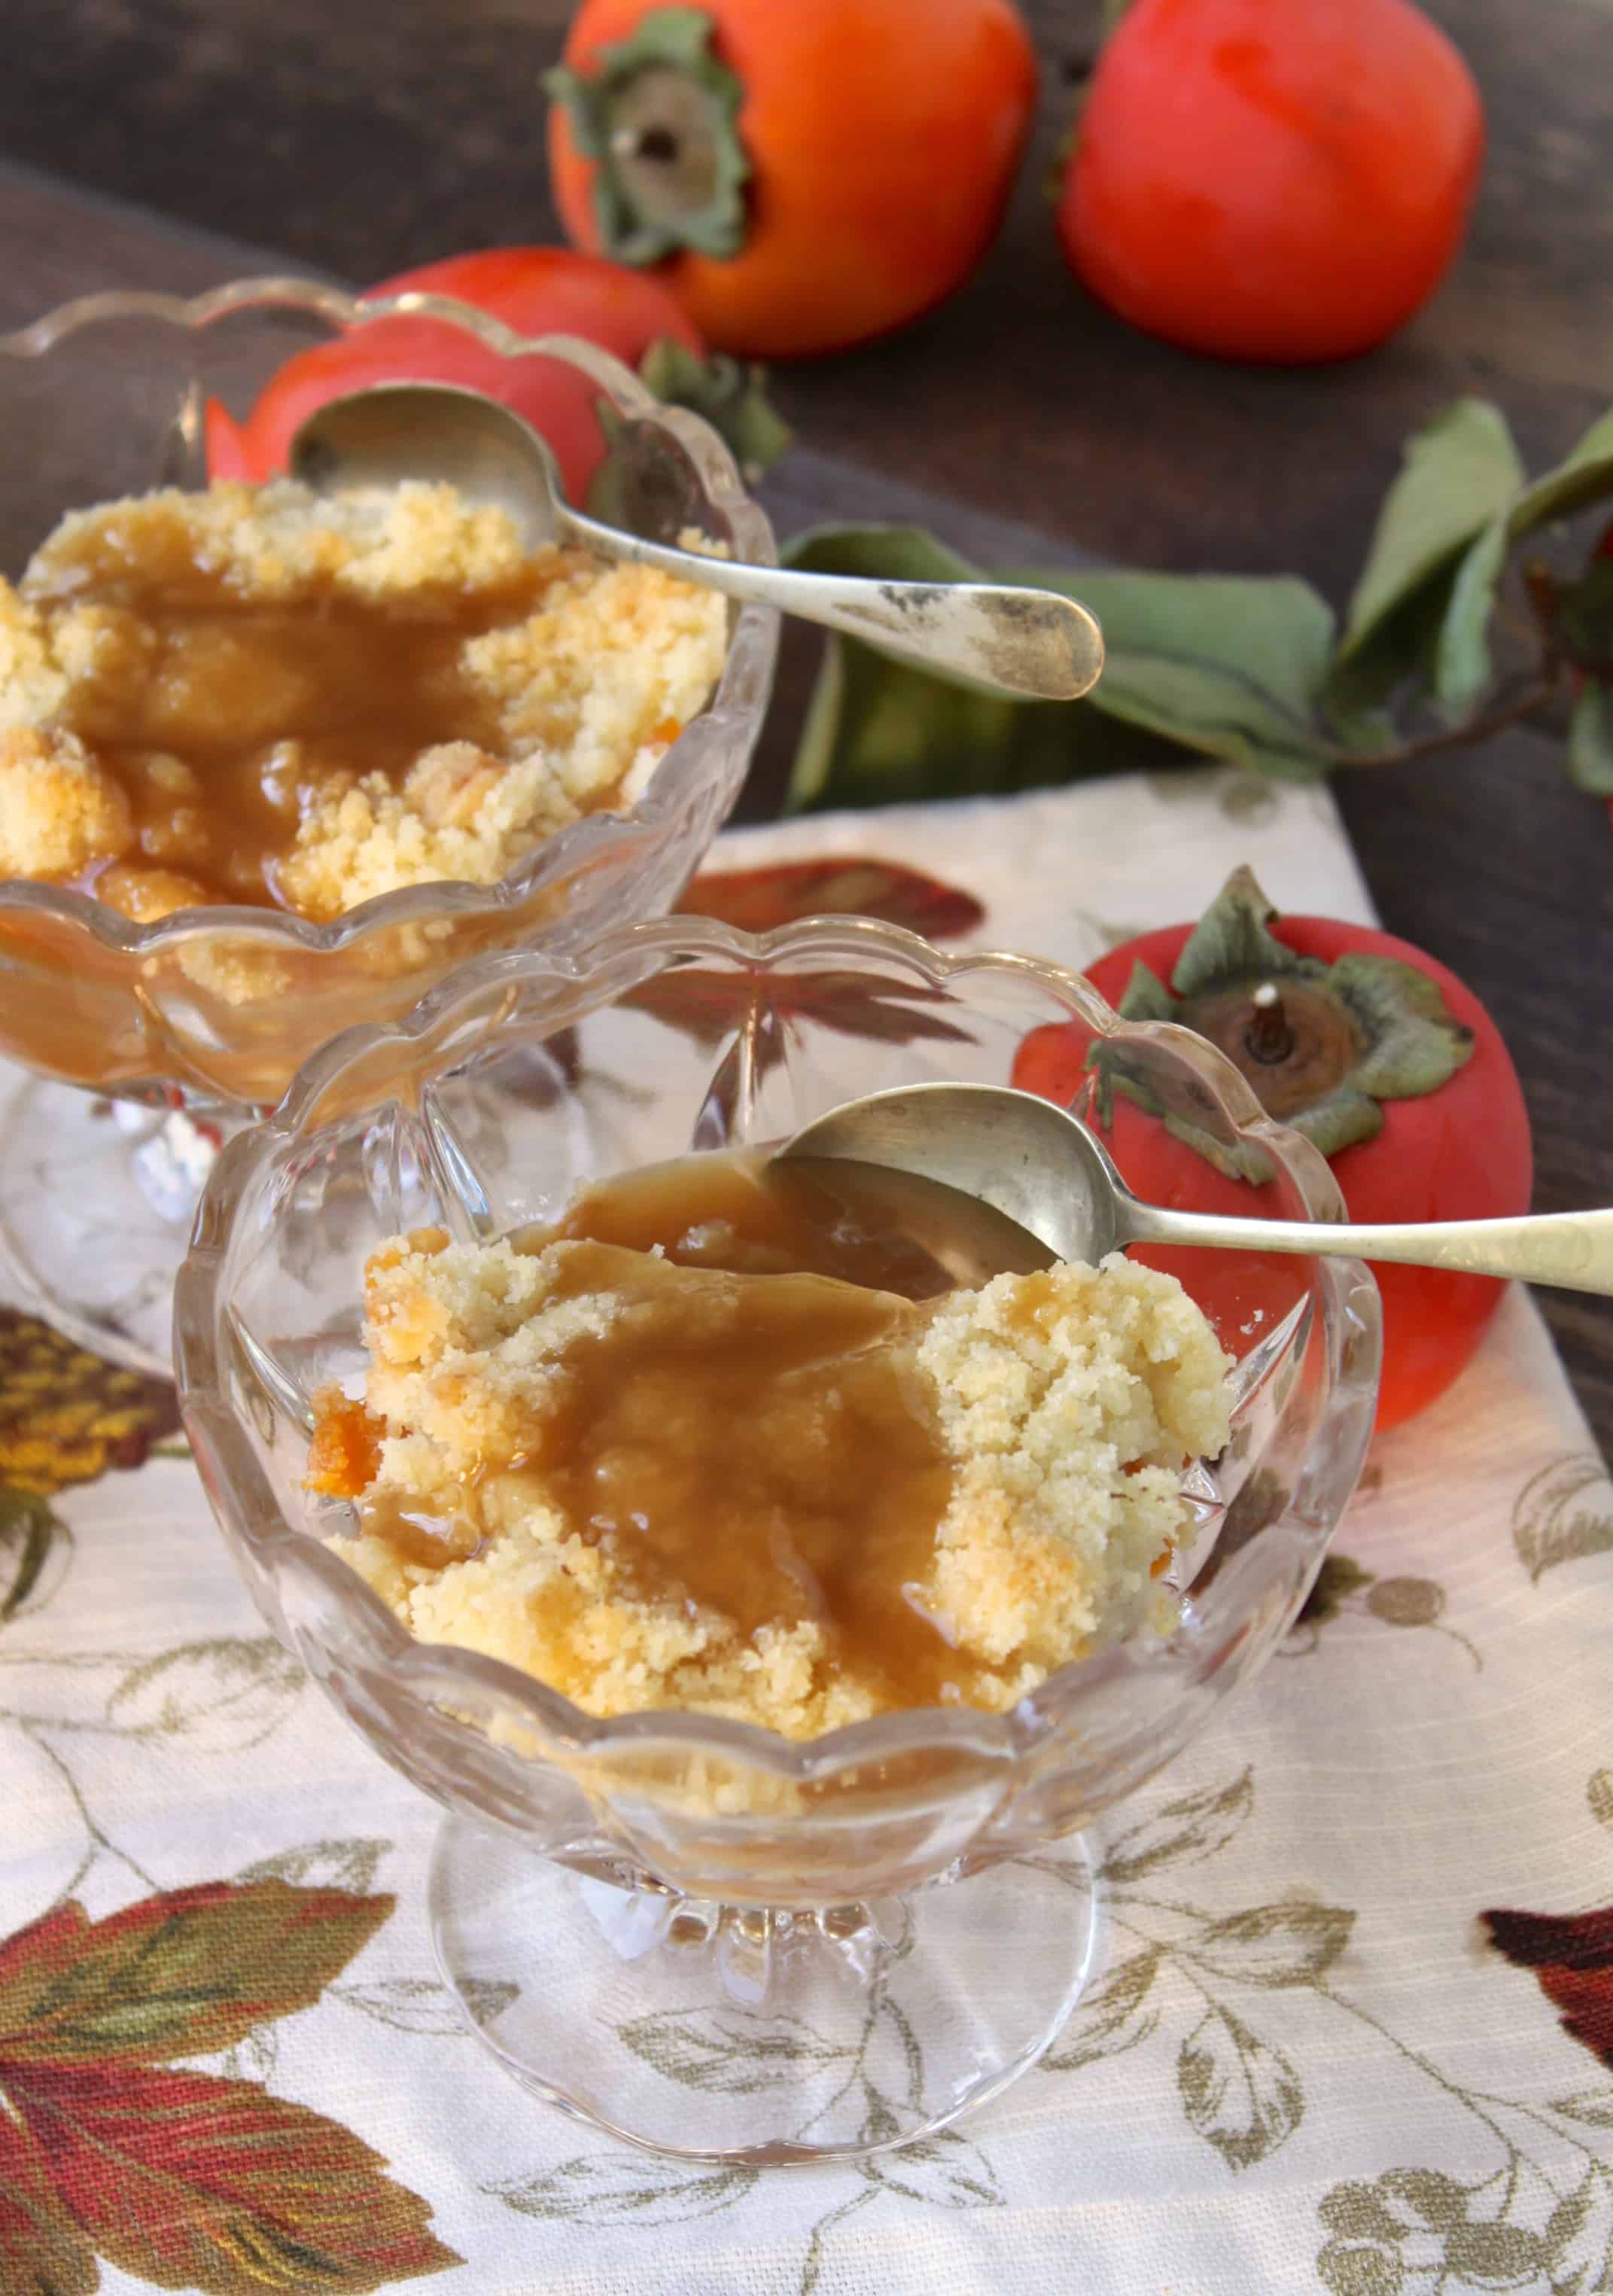 Persimmon Apple Crumble with Rum Sauce